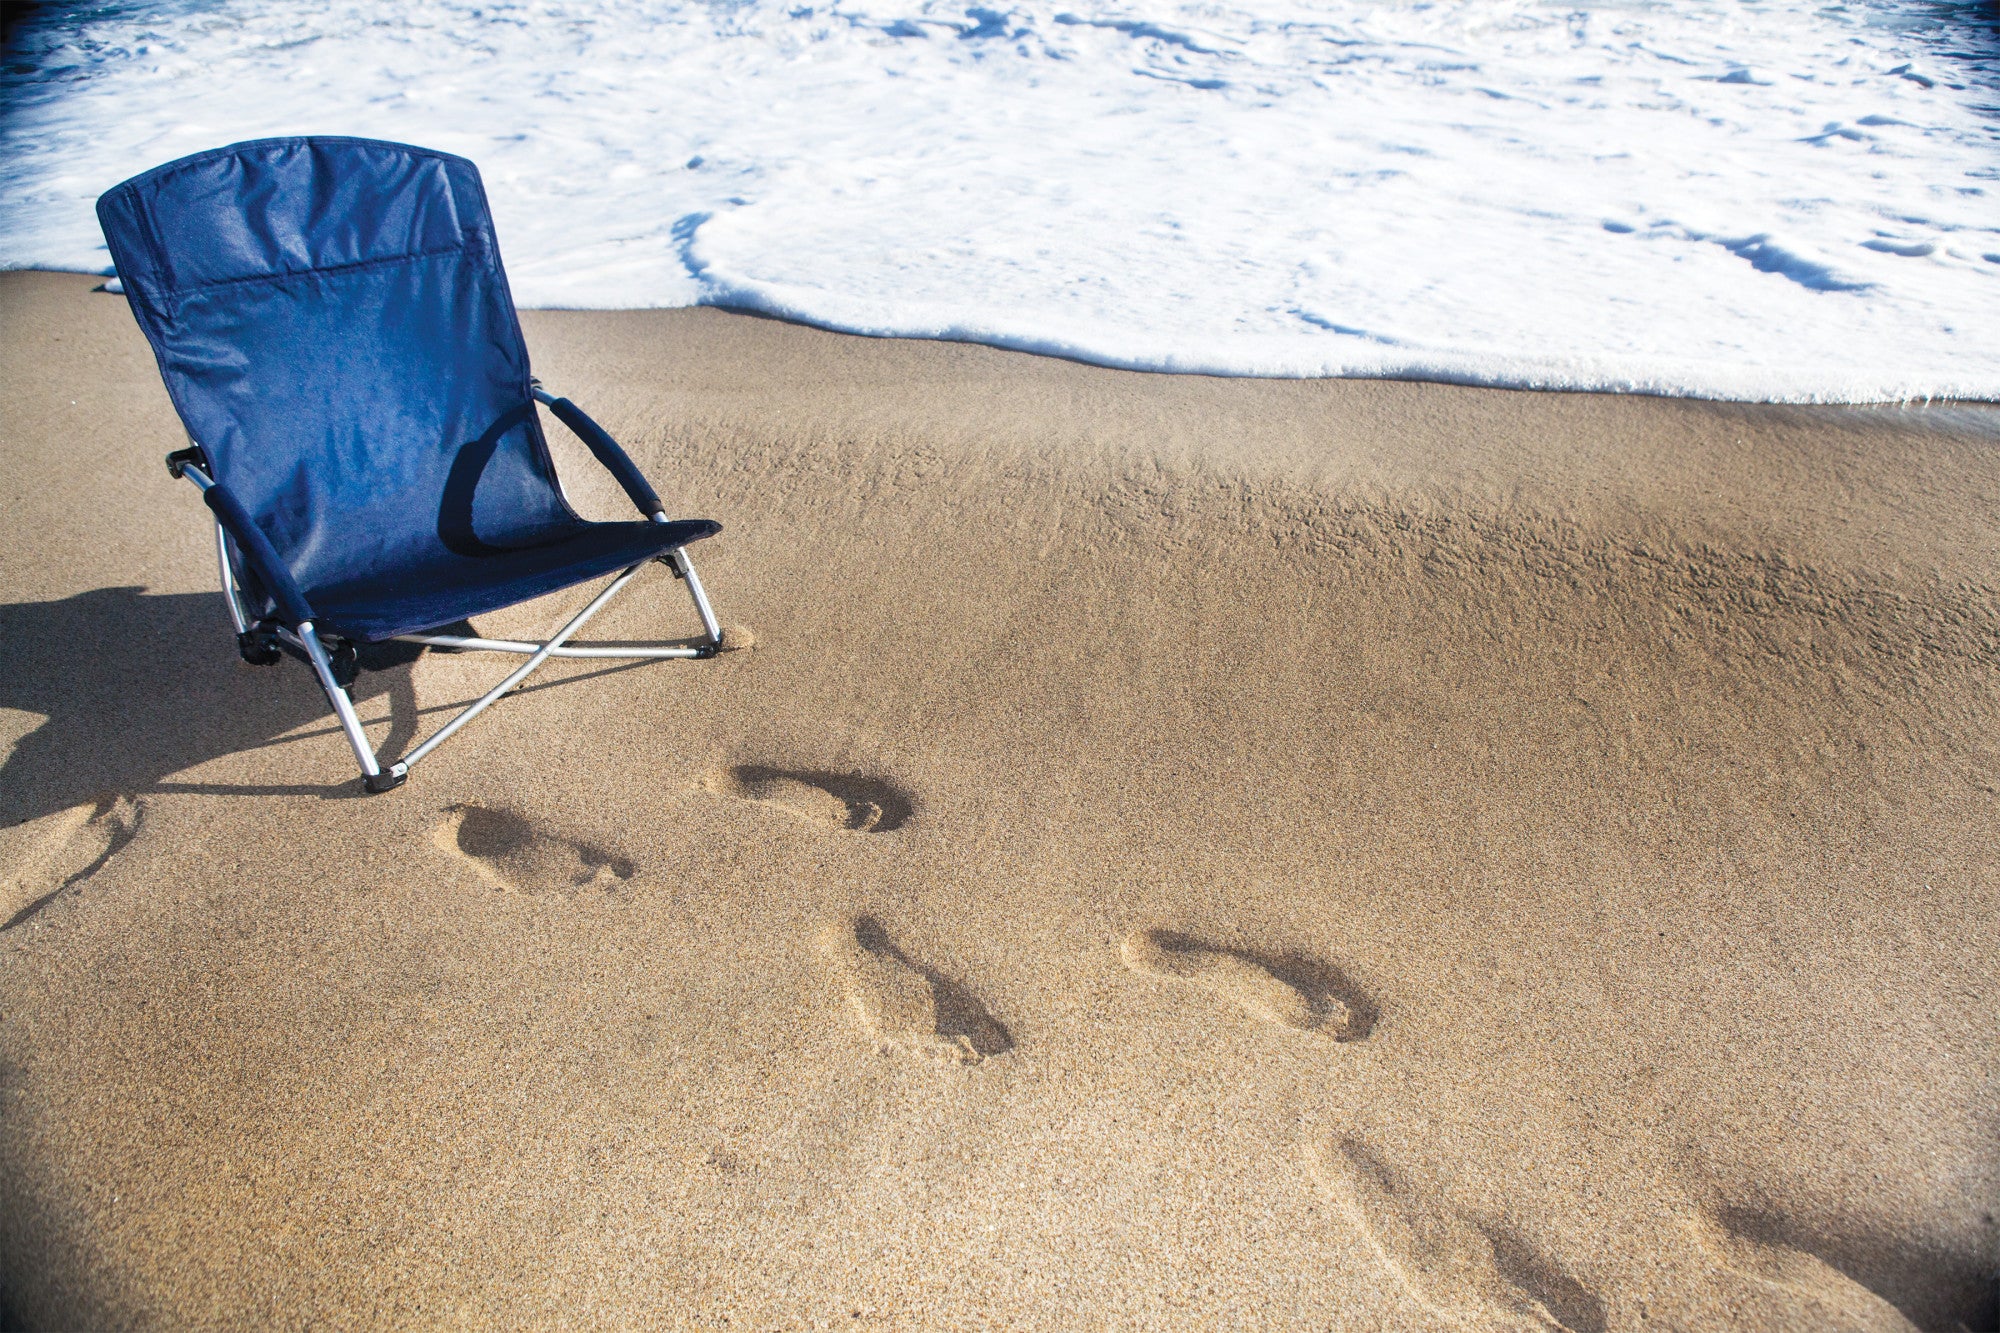 New York Mets - Tranquility Beach Chair with Carry Bag